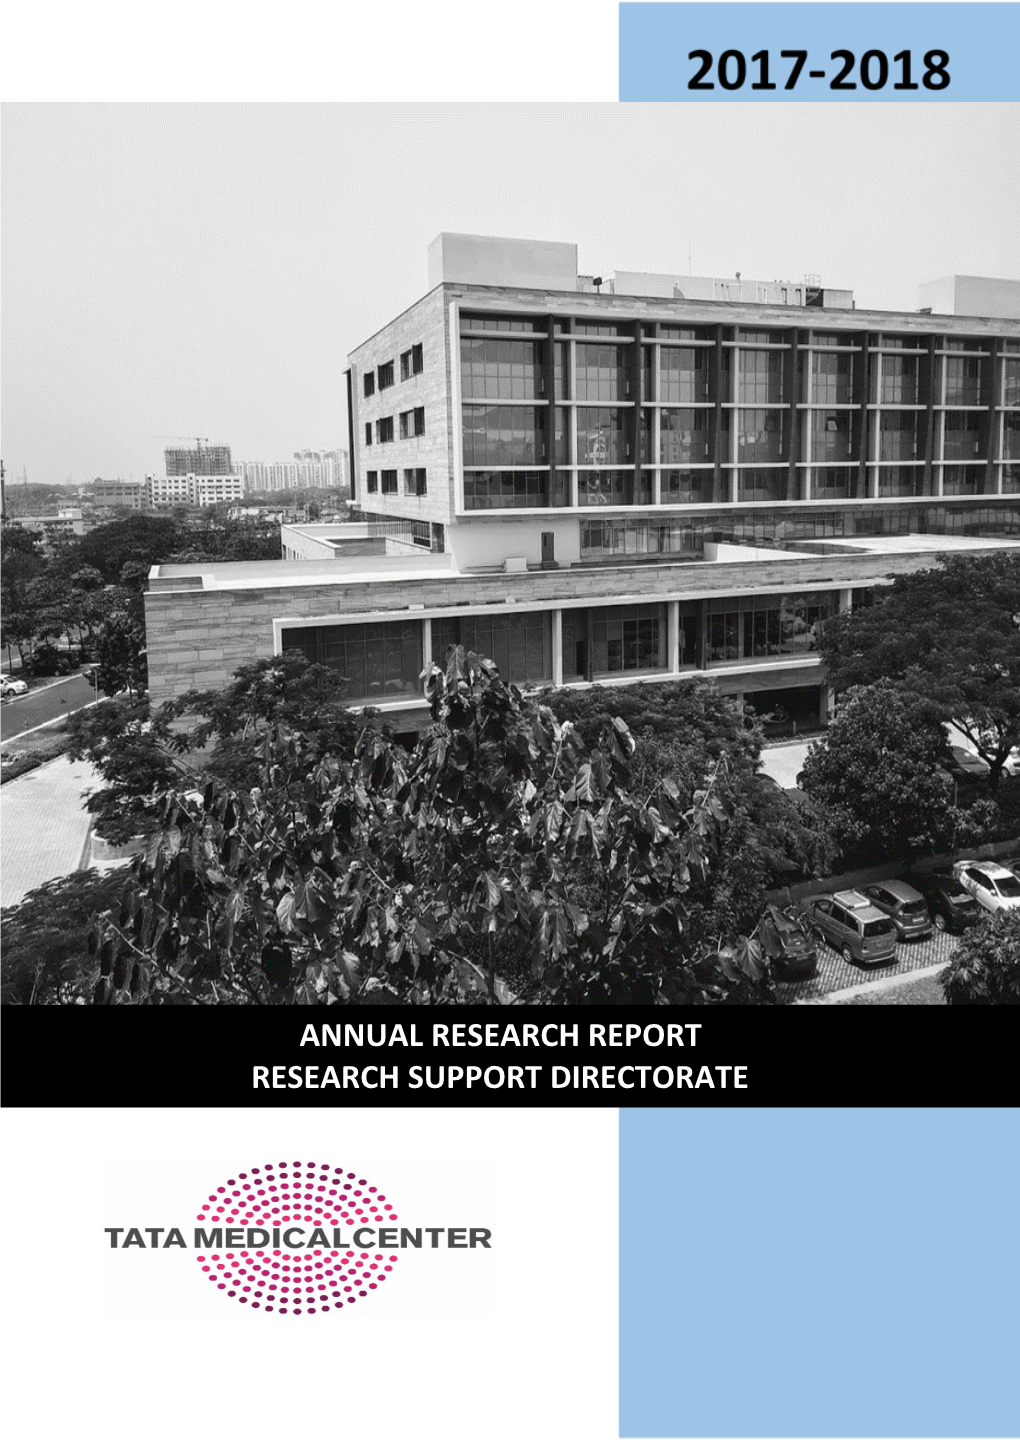 Annual Research Report Research Support Directorate